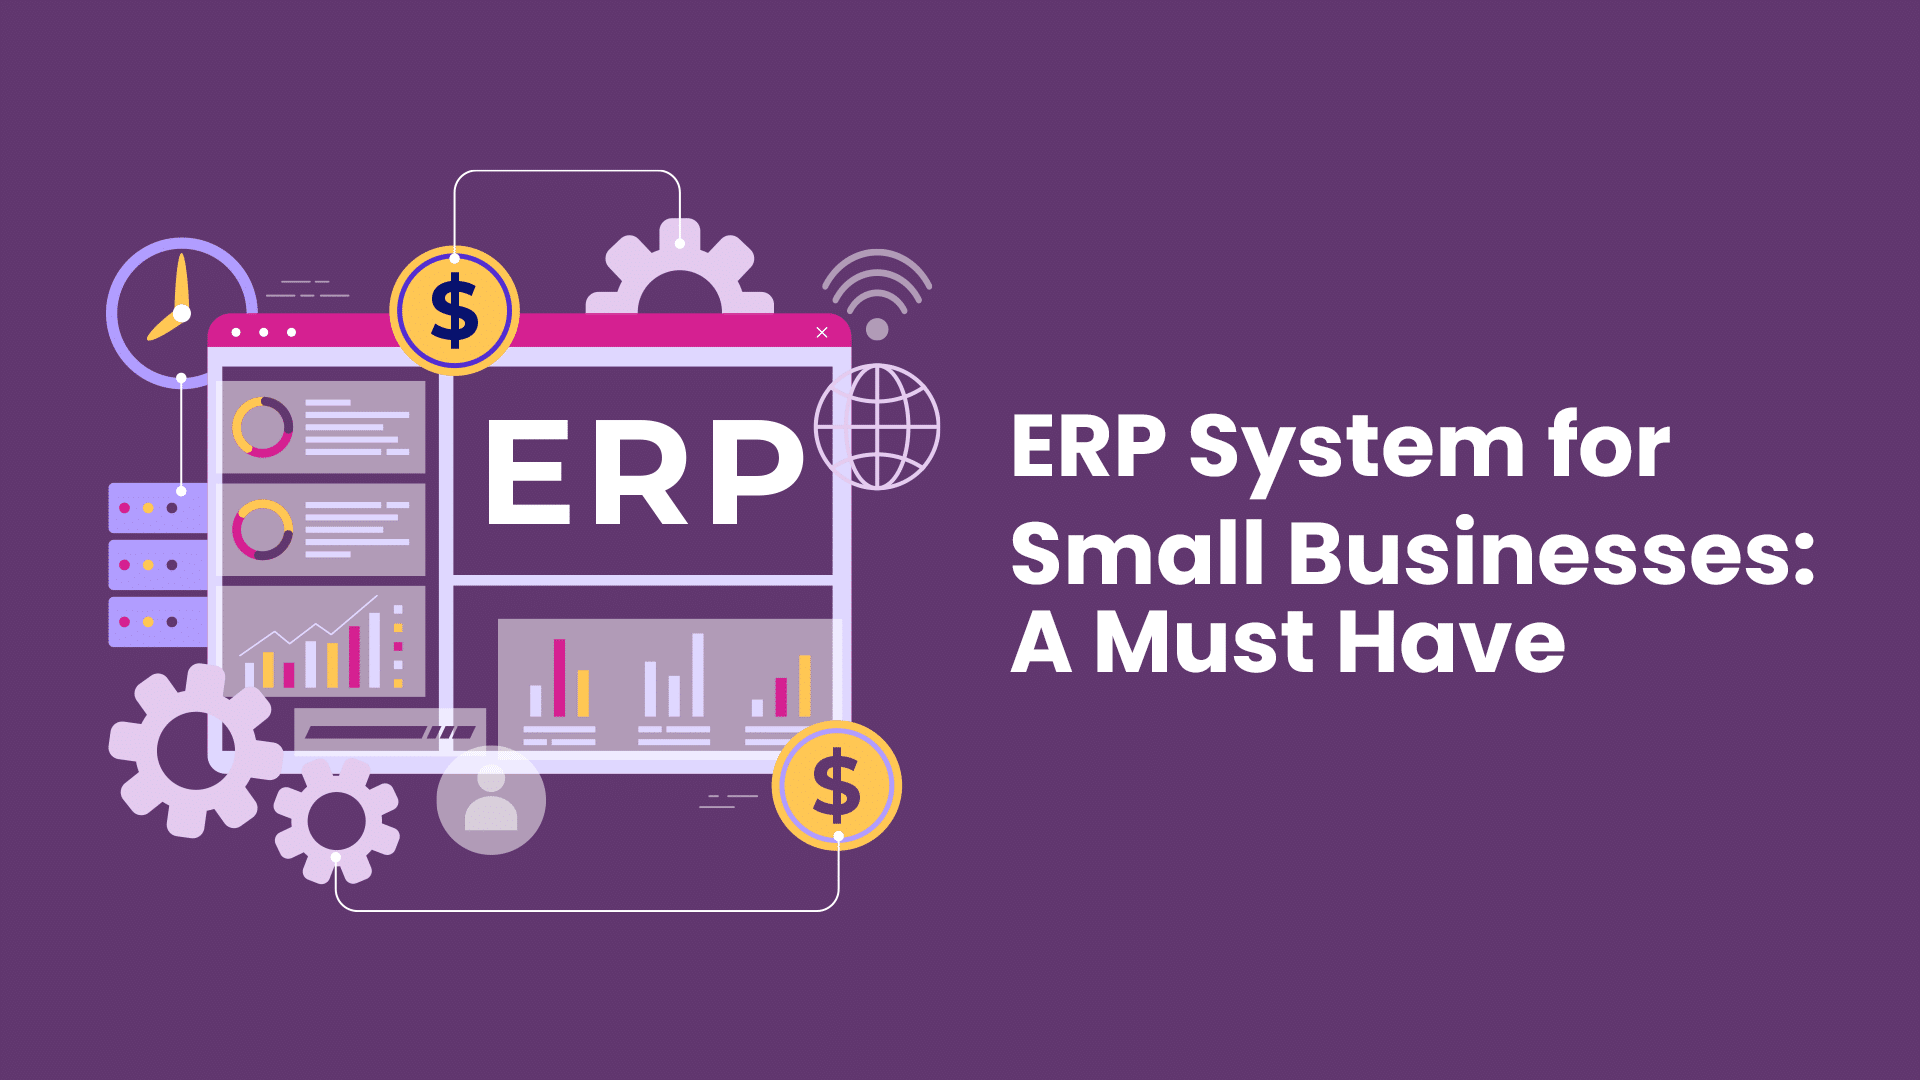 5 Reasons why ERP Systems for Small Businesses are important?